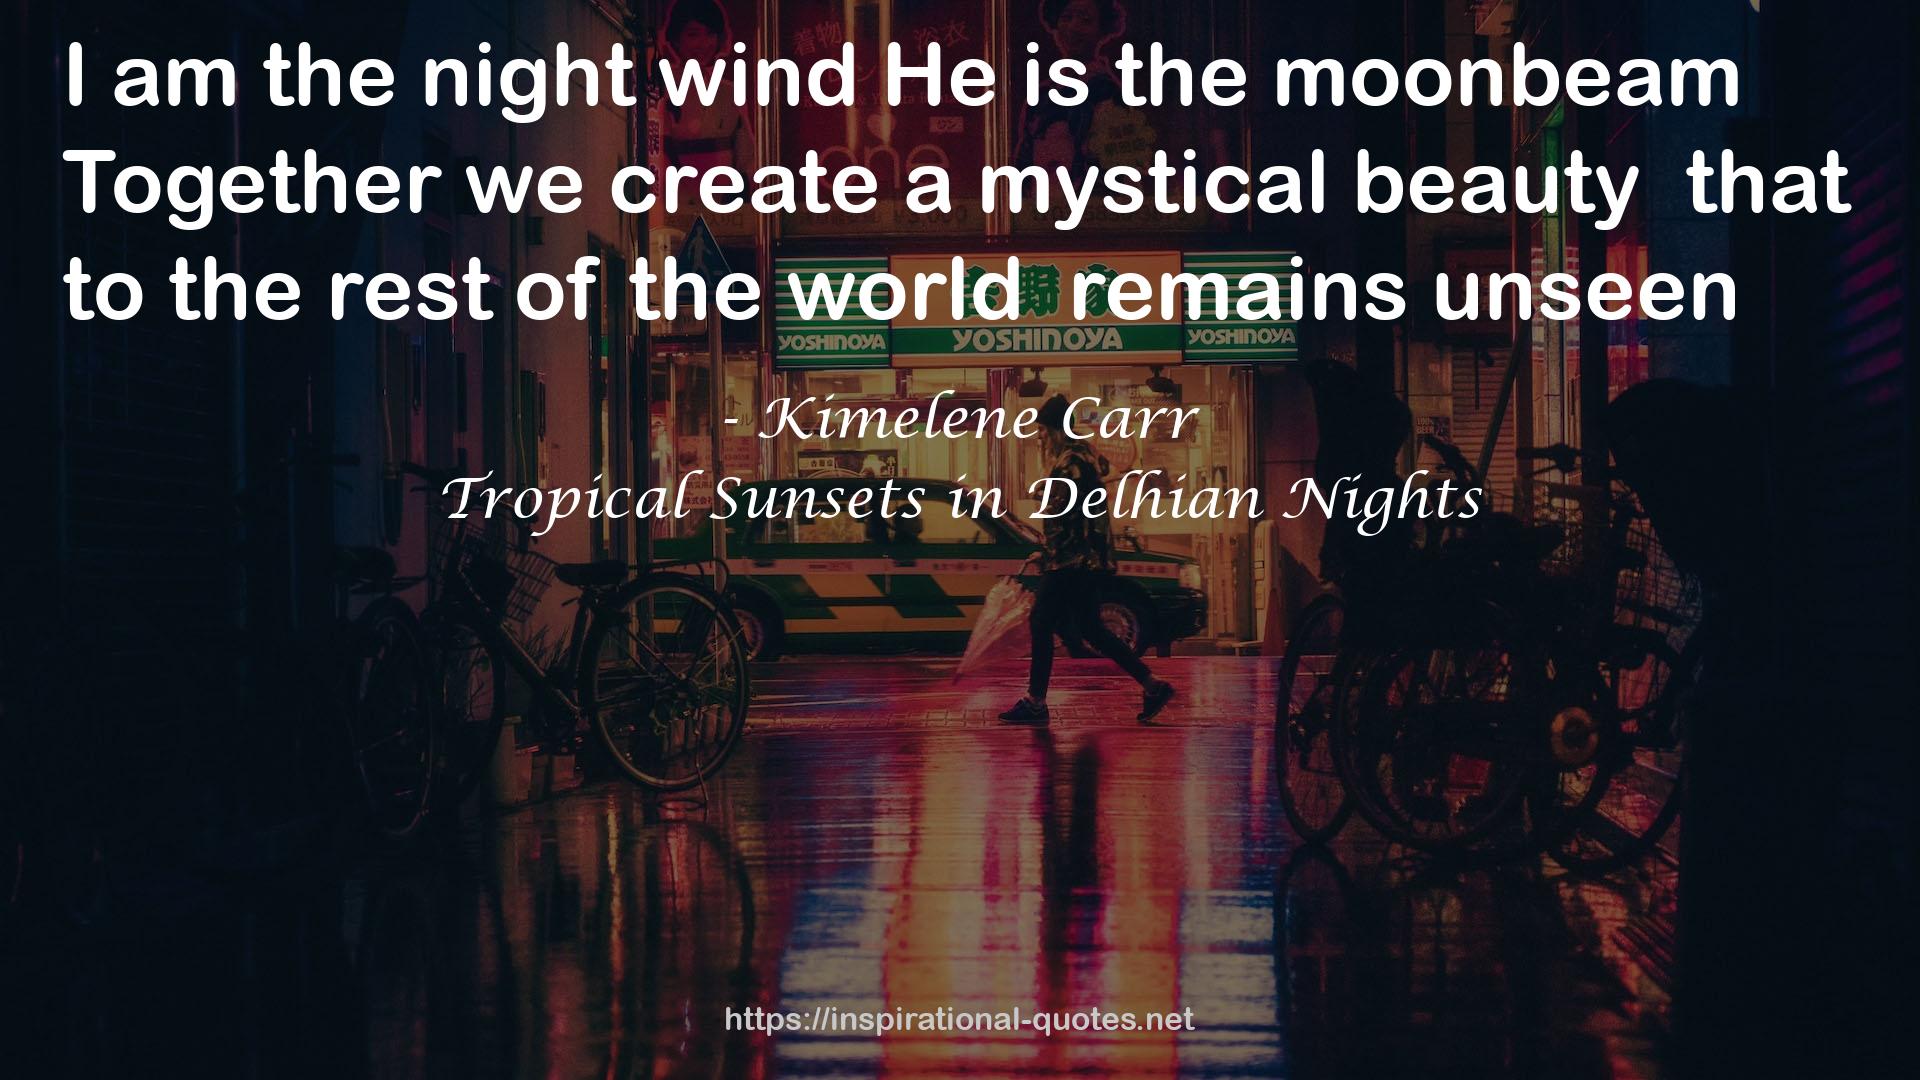 Tropical Sunsets in Delhian Nights QUOTES